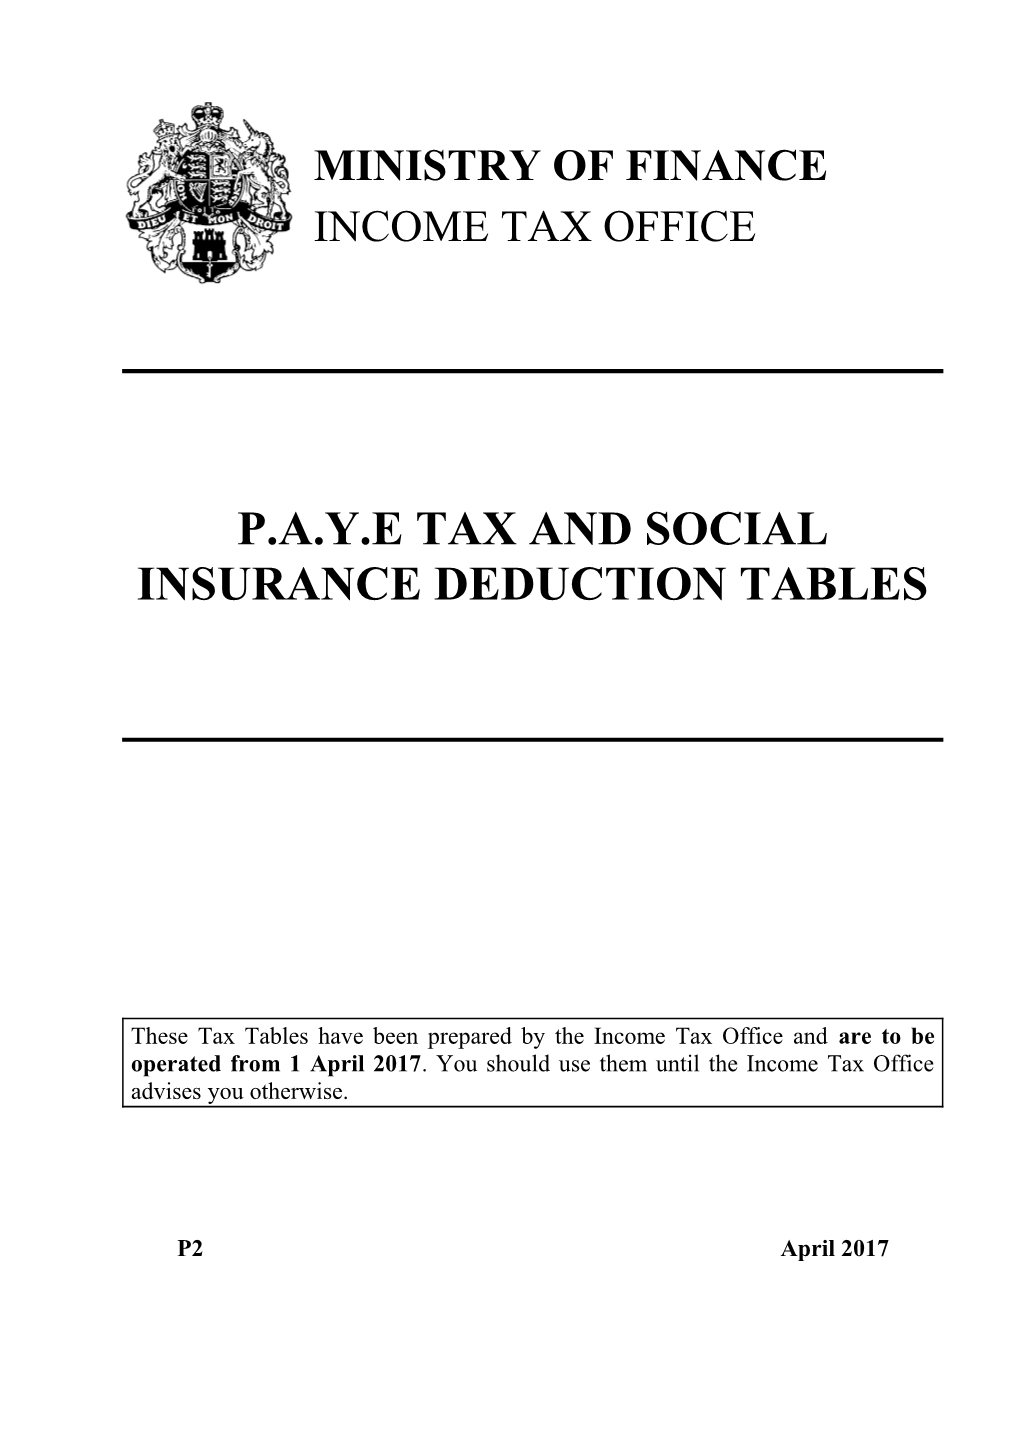 P.A.Y.E Tax and Social Insurance Deduction Tables